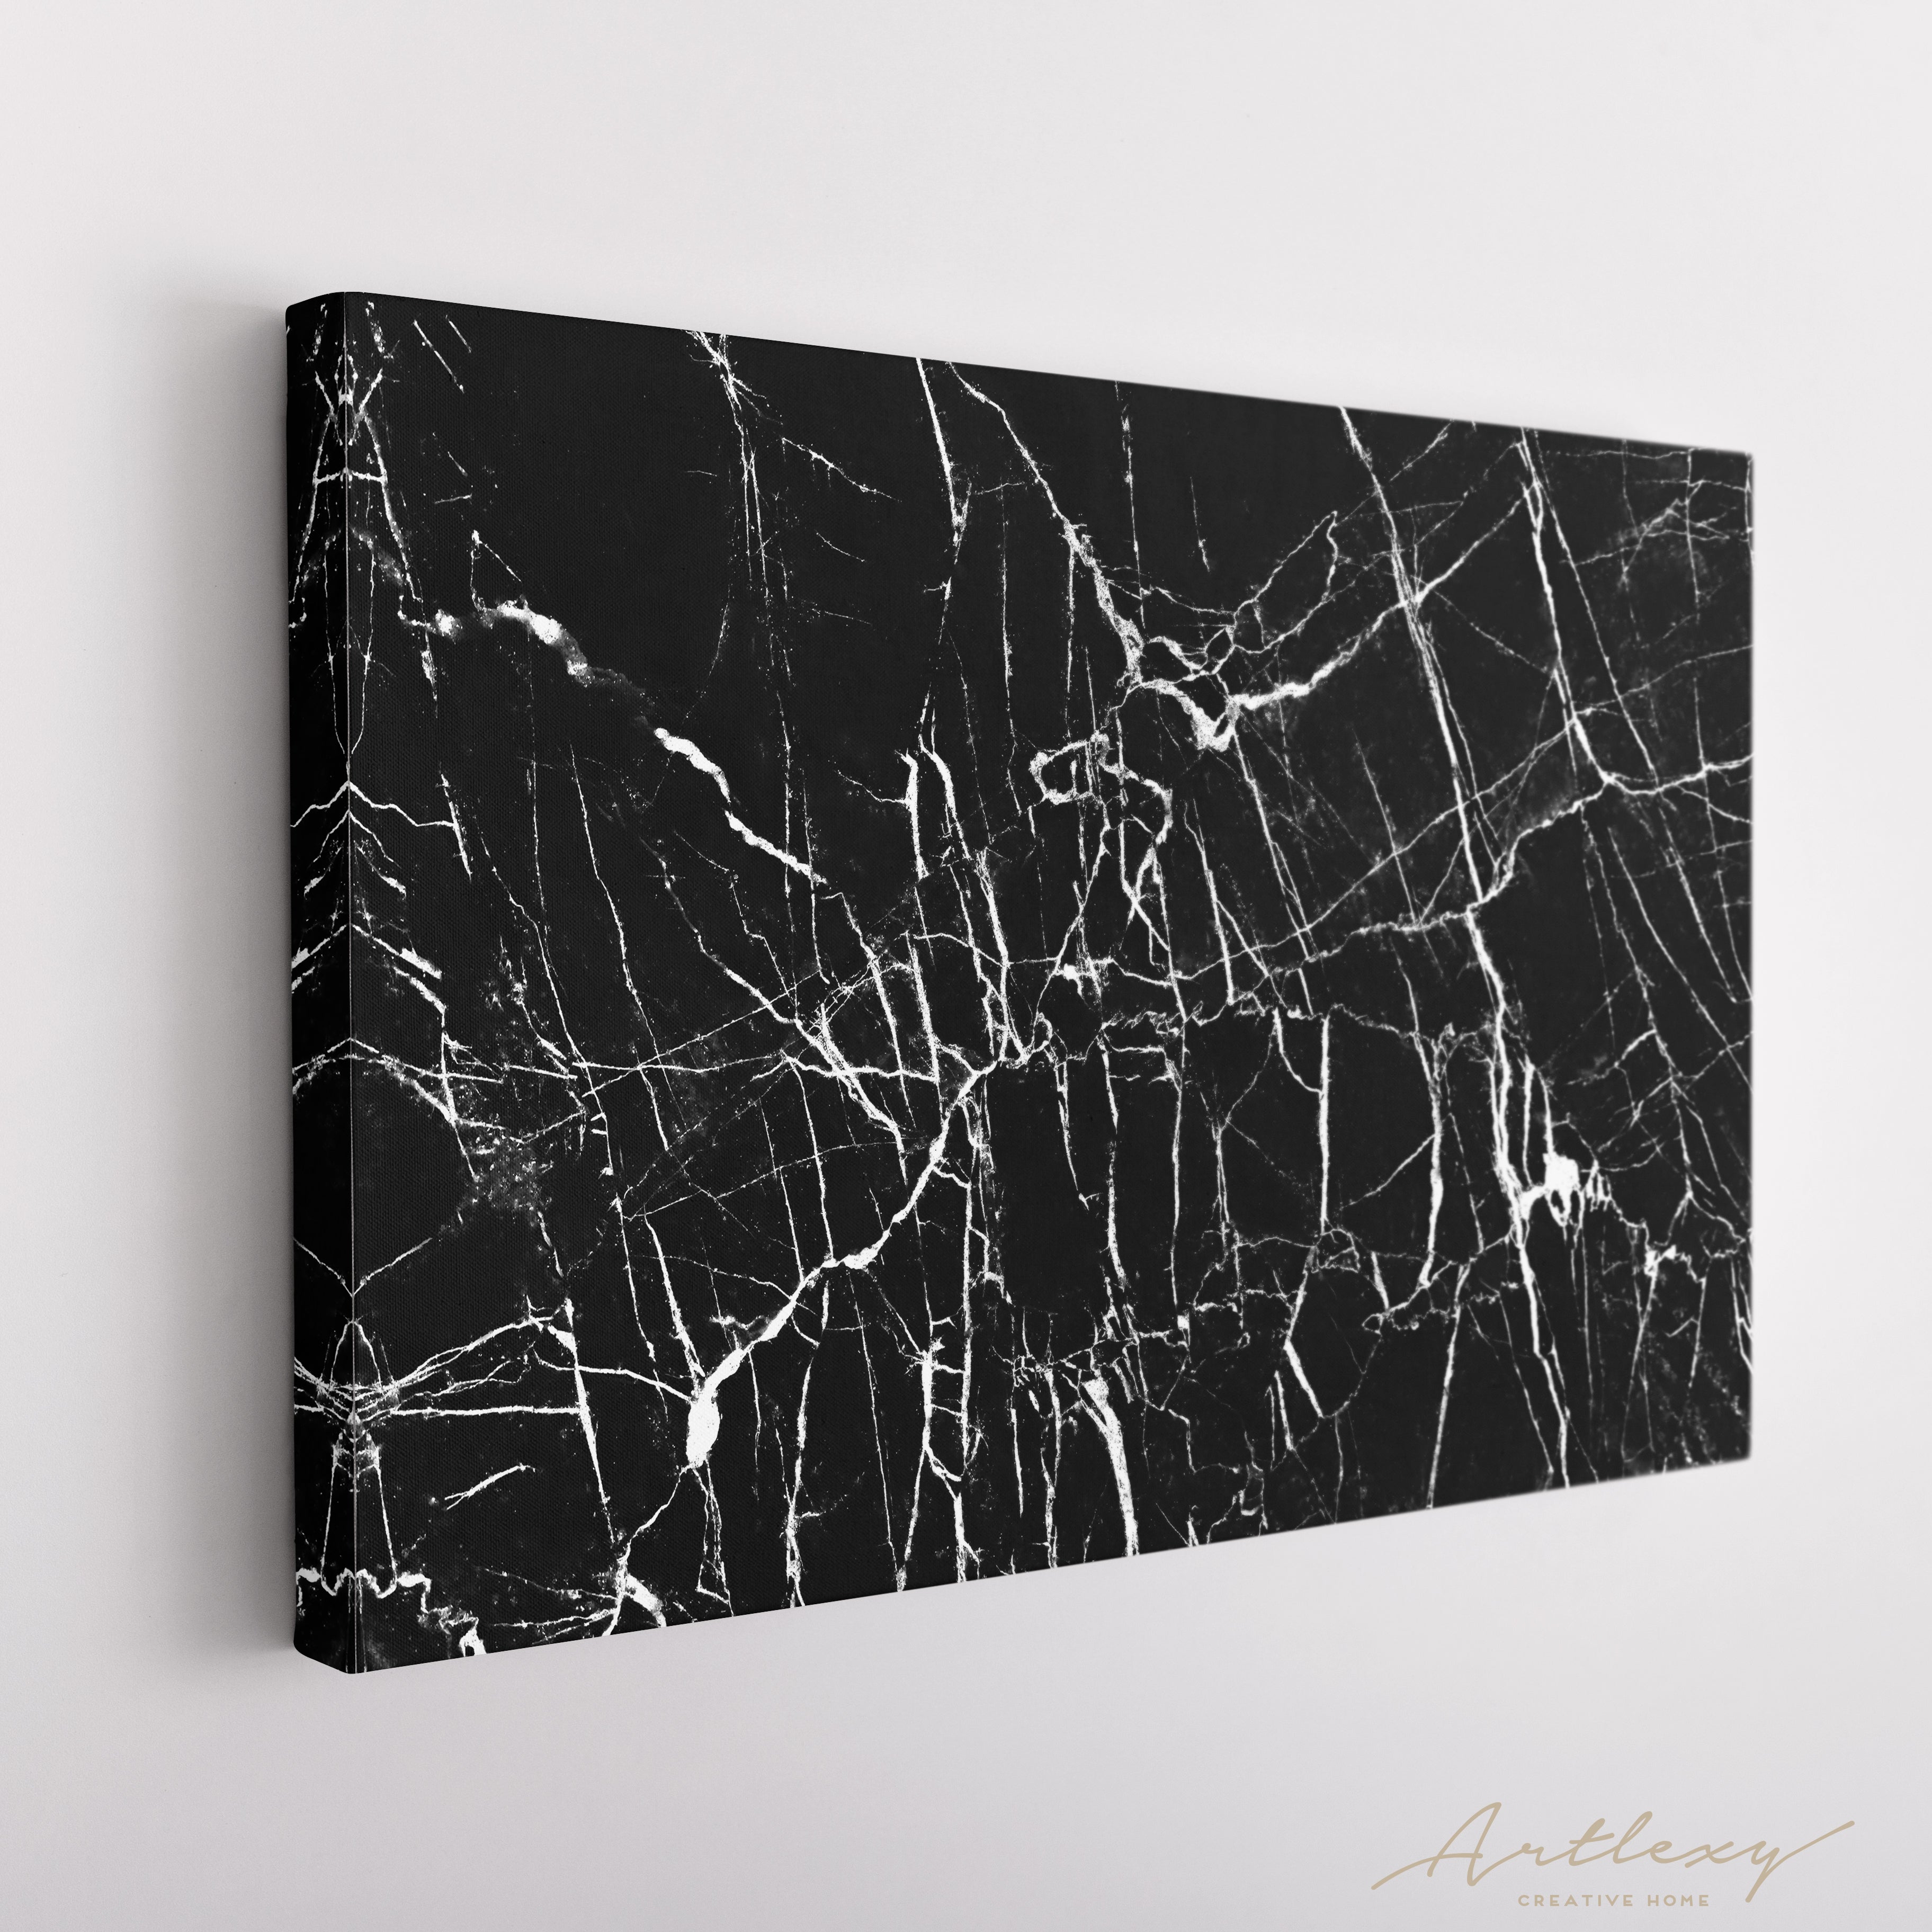 Black Marble Stone with Veins Canvas Print ArtLexy   